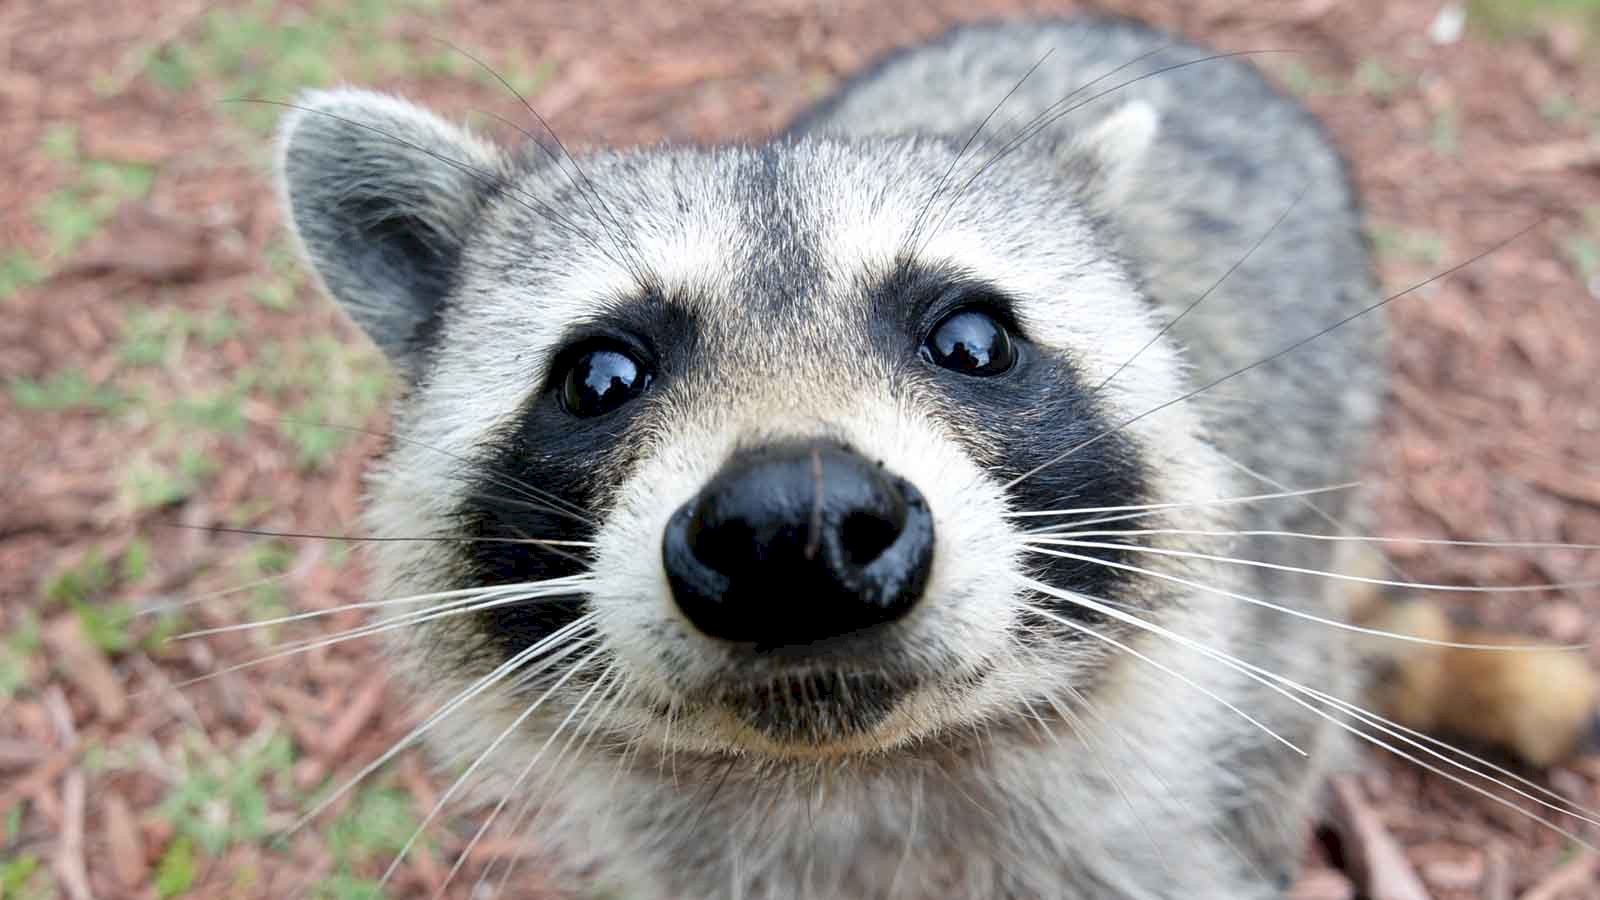 Close up image of a curious raccoon inspecting the camera with a friendly face.